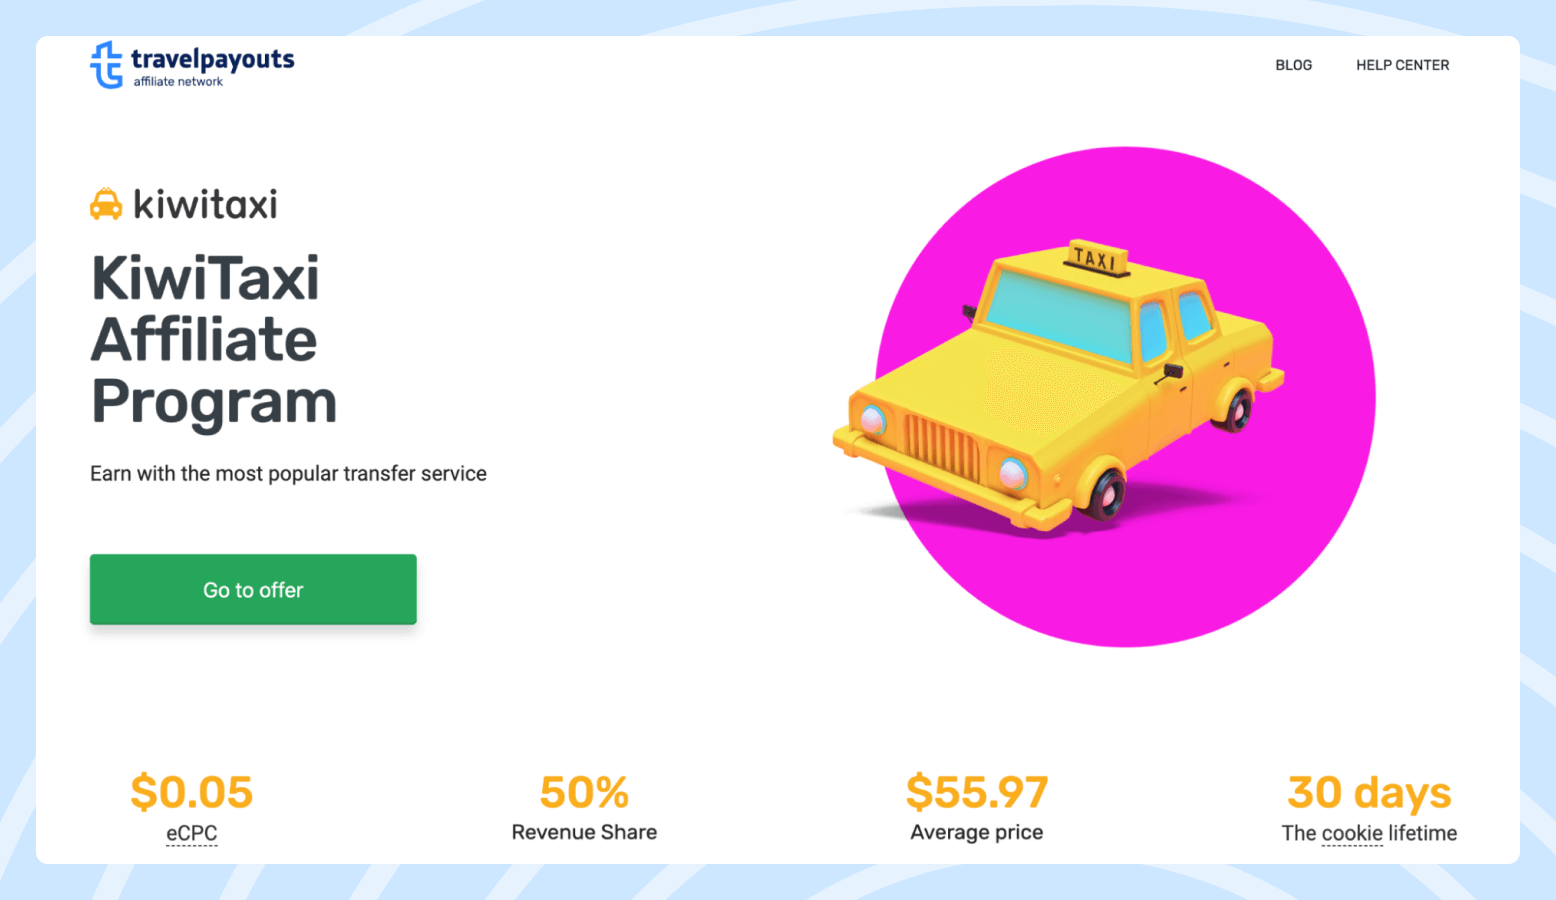 Screenshot of the KiwiTaxi affiliate program page featuring a yellow taxi car on its way